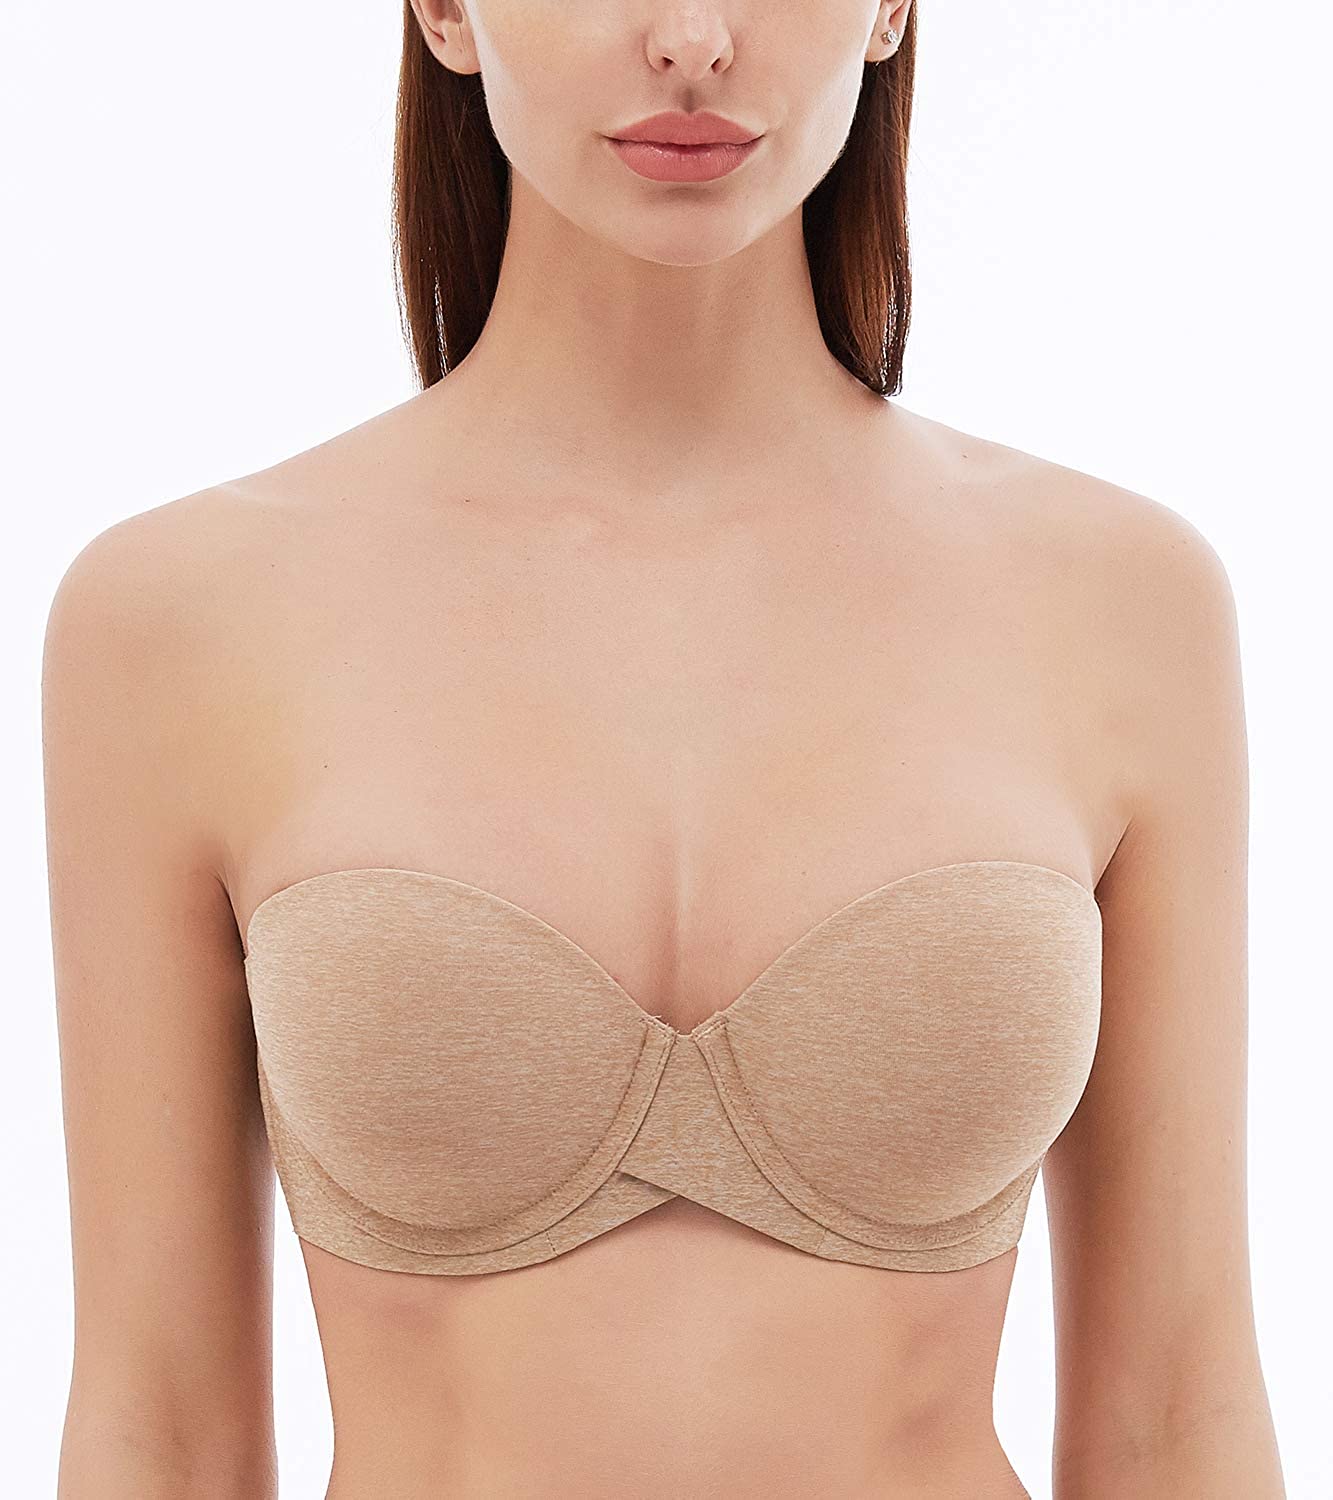 SELONE Everyday Bras for Women Push Up No Underwire Strapless for